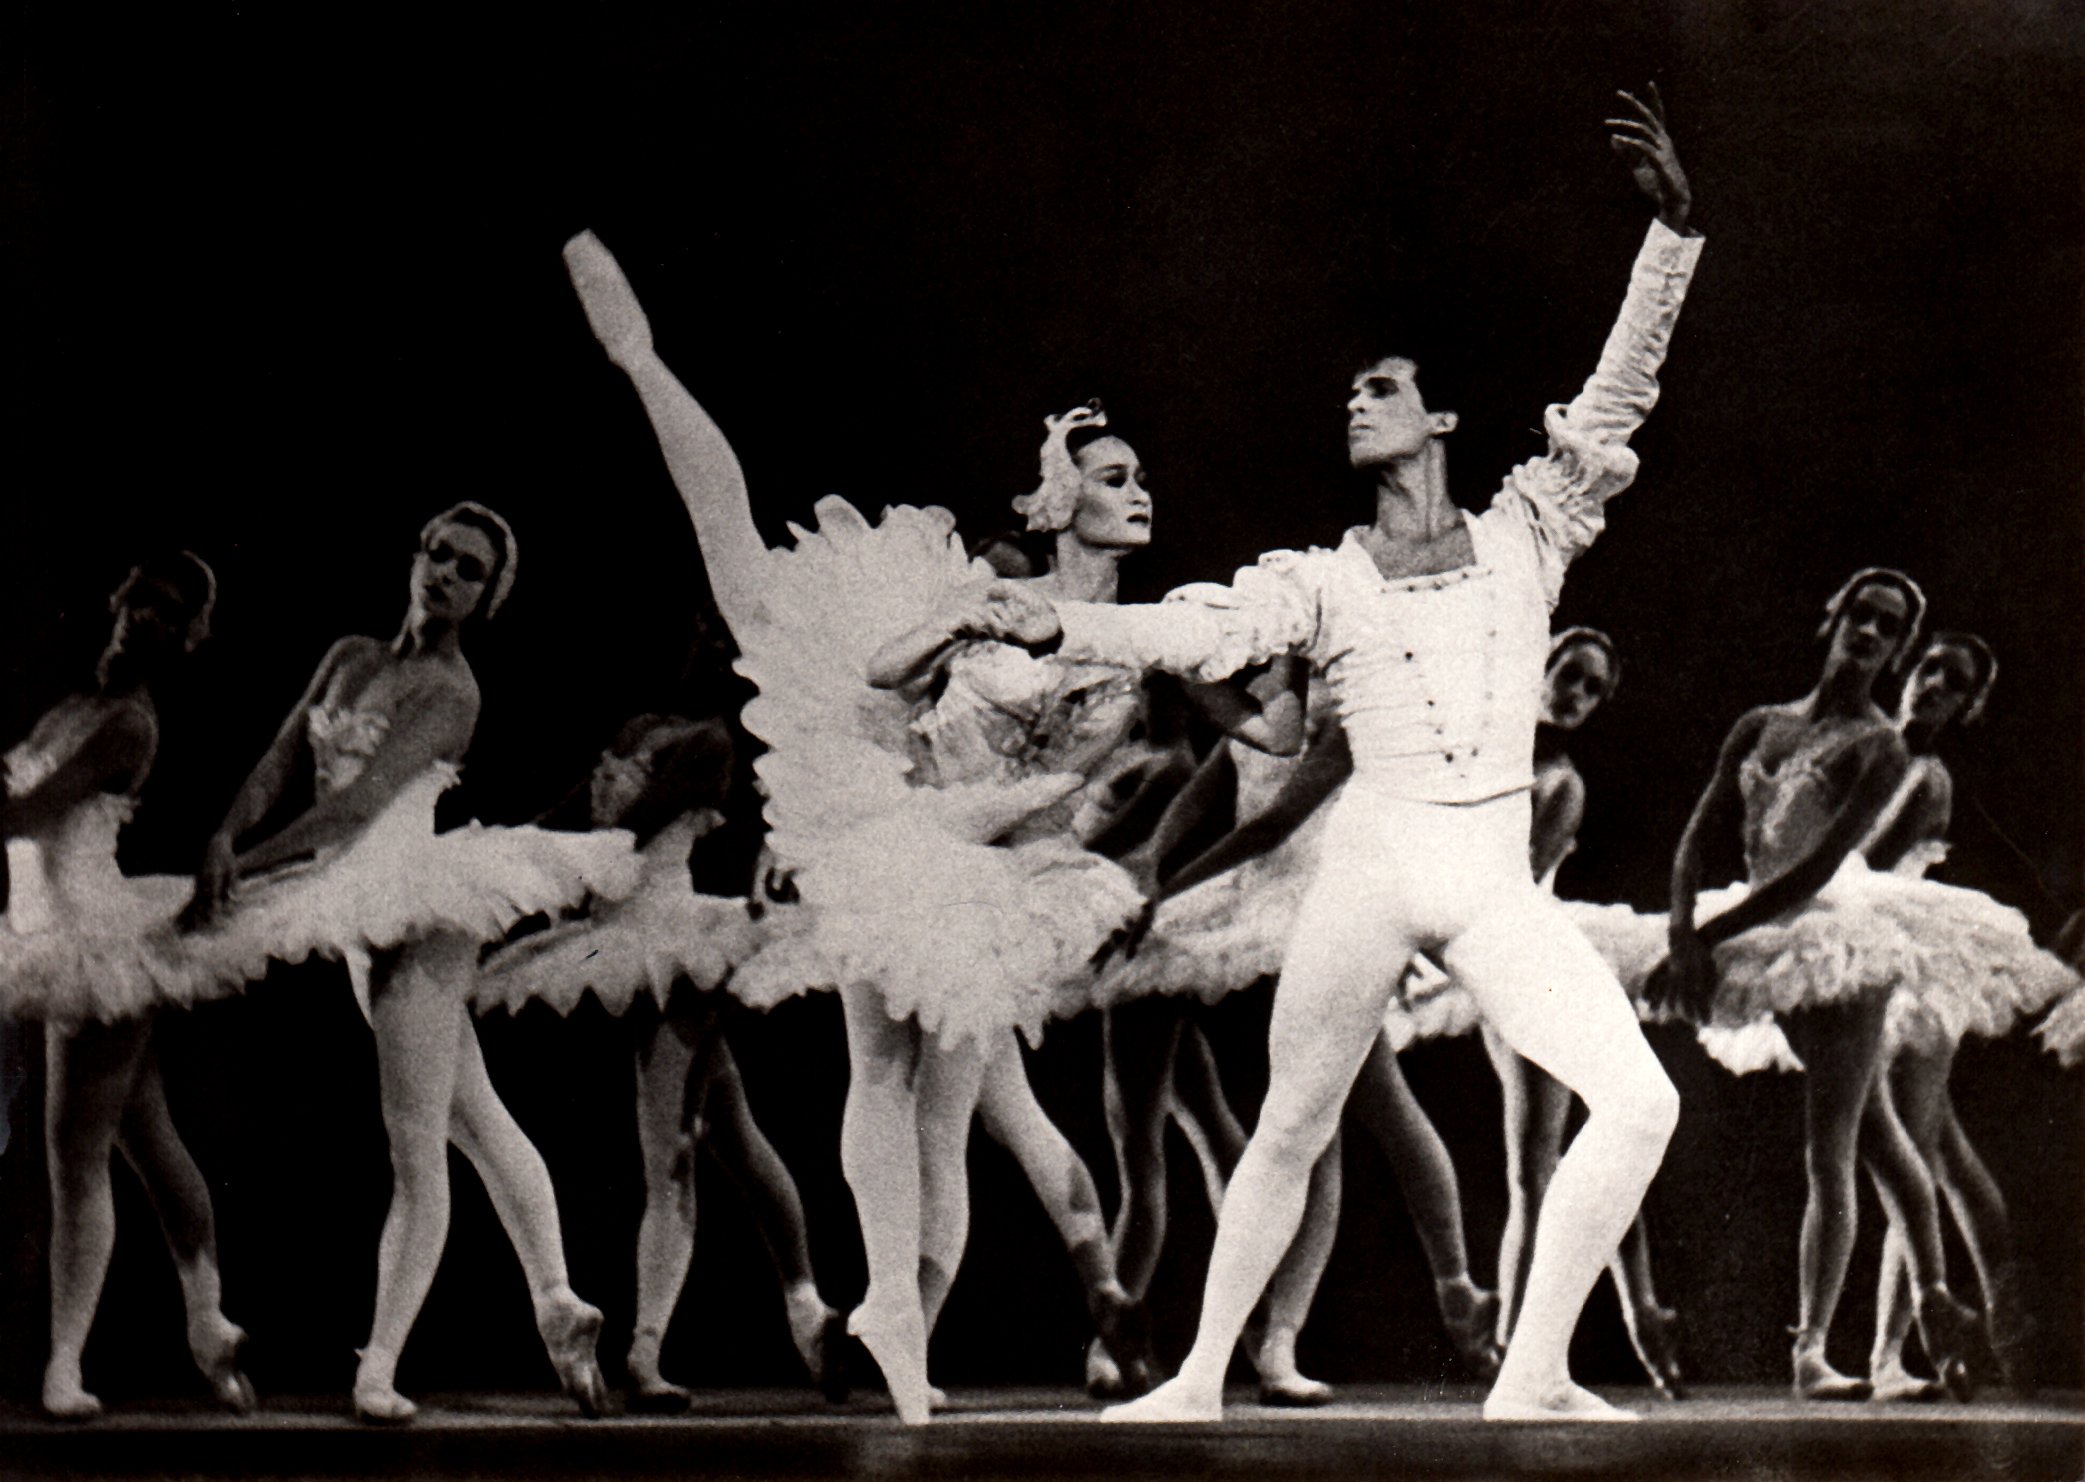    Unexpected full-length debut in Cuba, 1990. “I only got to dance my first full-length  Swan Lake  by accident – quite literally. I happened to be in Havana, Cuba in November 1990, dancing several classical and neo-classical pas de deux with my par